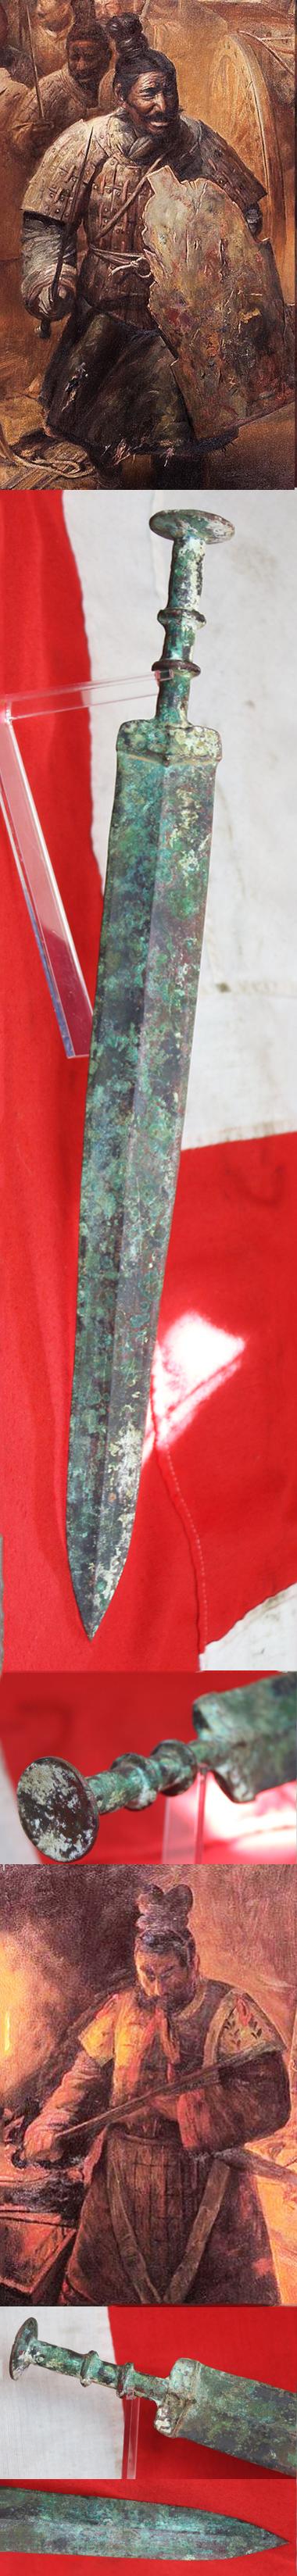 Archaic Chinese Warrior's Bronze Sword, Around 2,300 to 2,800 Years Old, From the Zhou Dynasty to the Qin Dynasty, Including the Period of the Great Military Doctrine 'The Art of War' by General Sun-Tzu